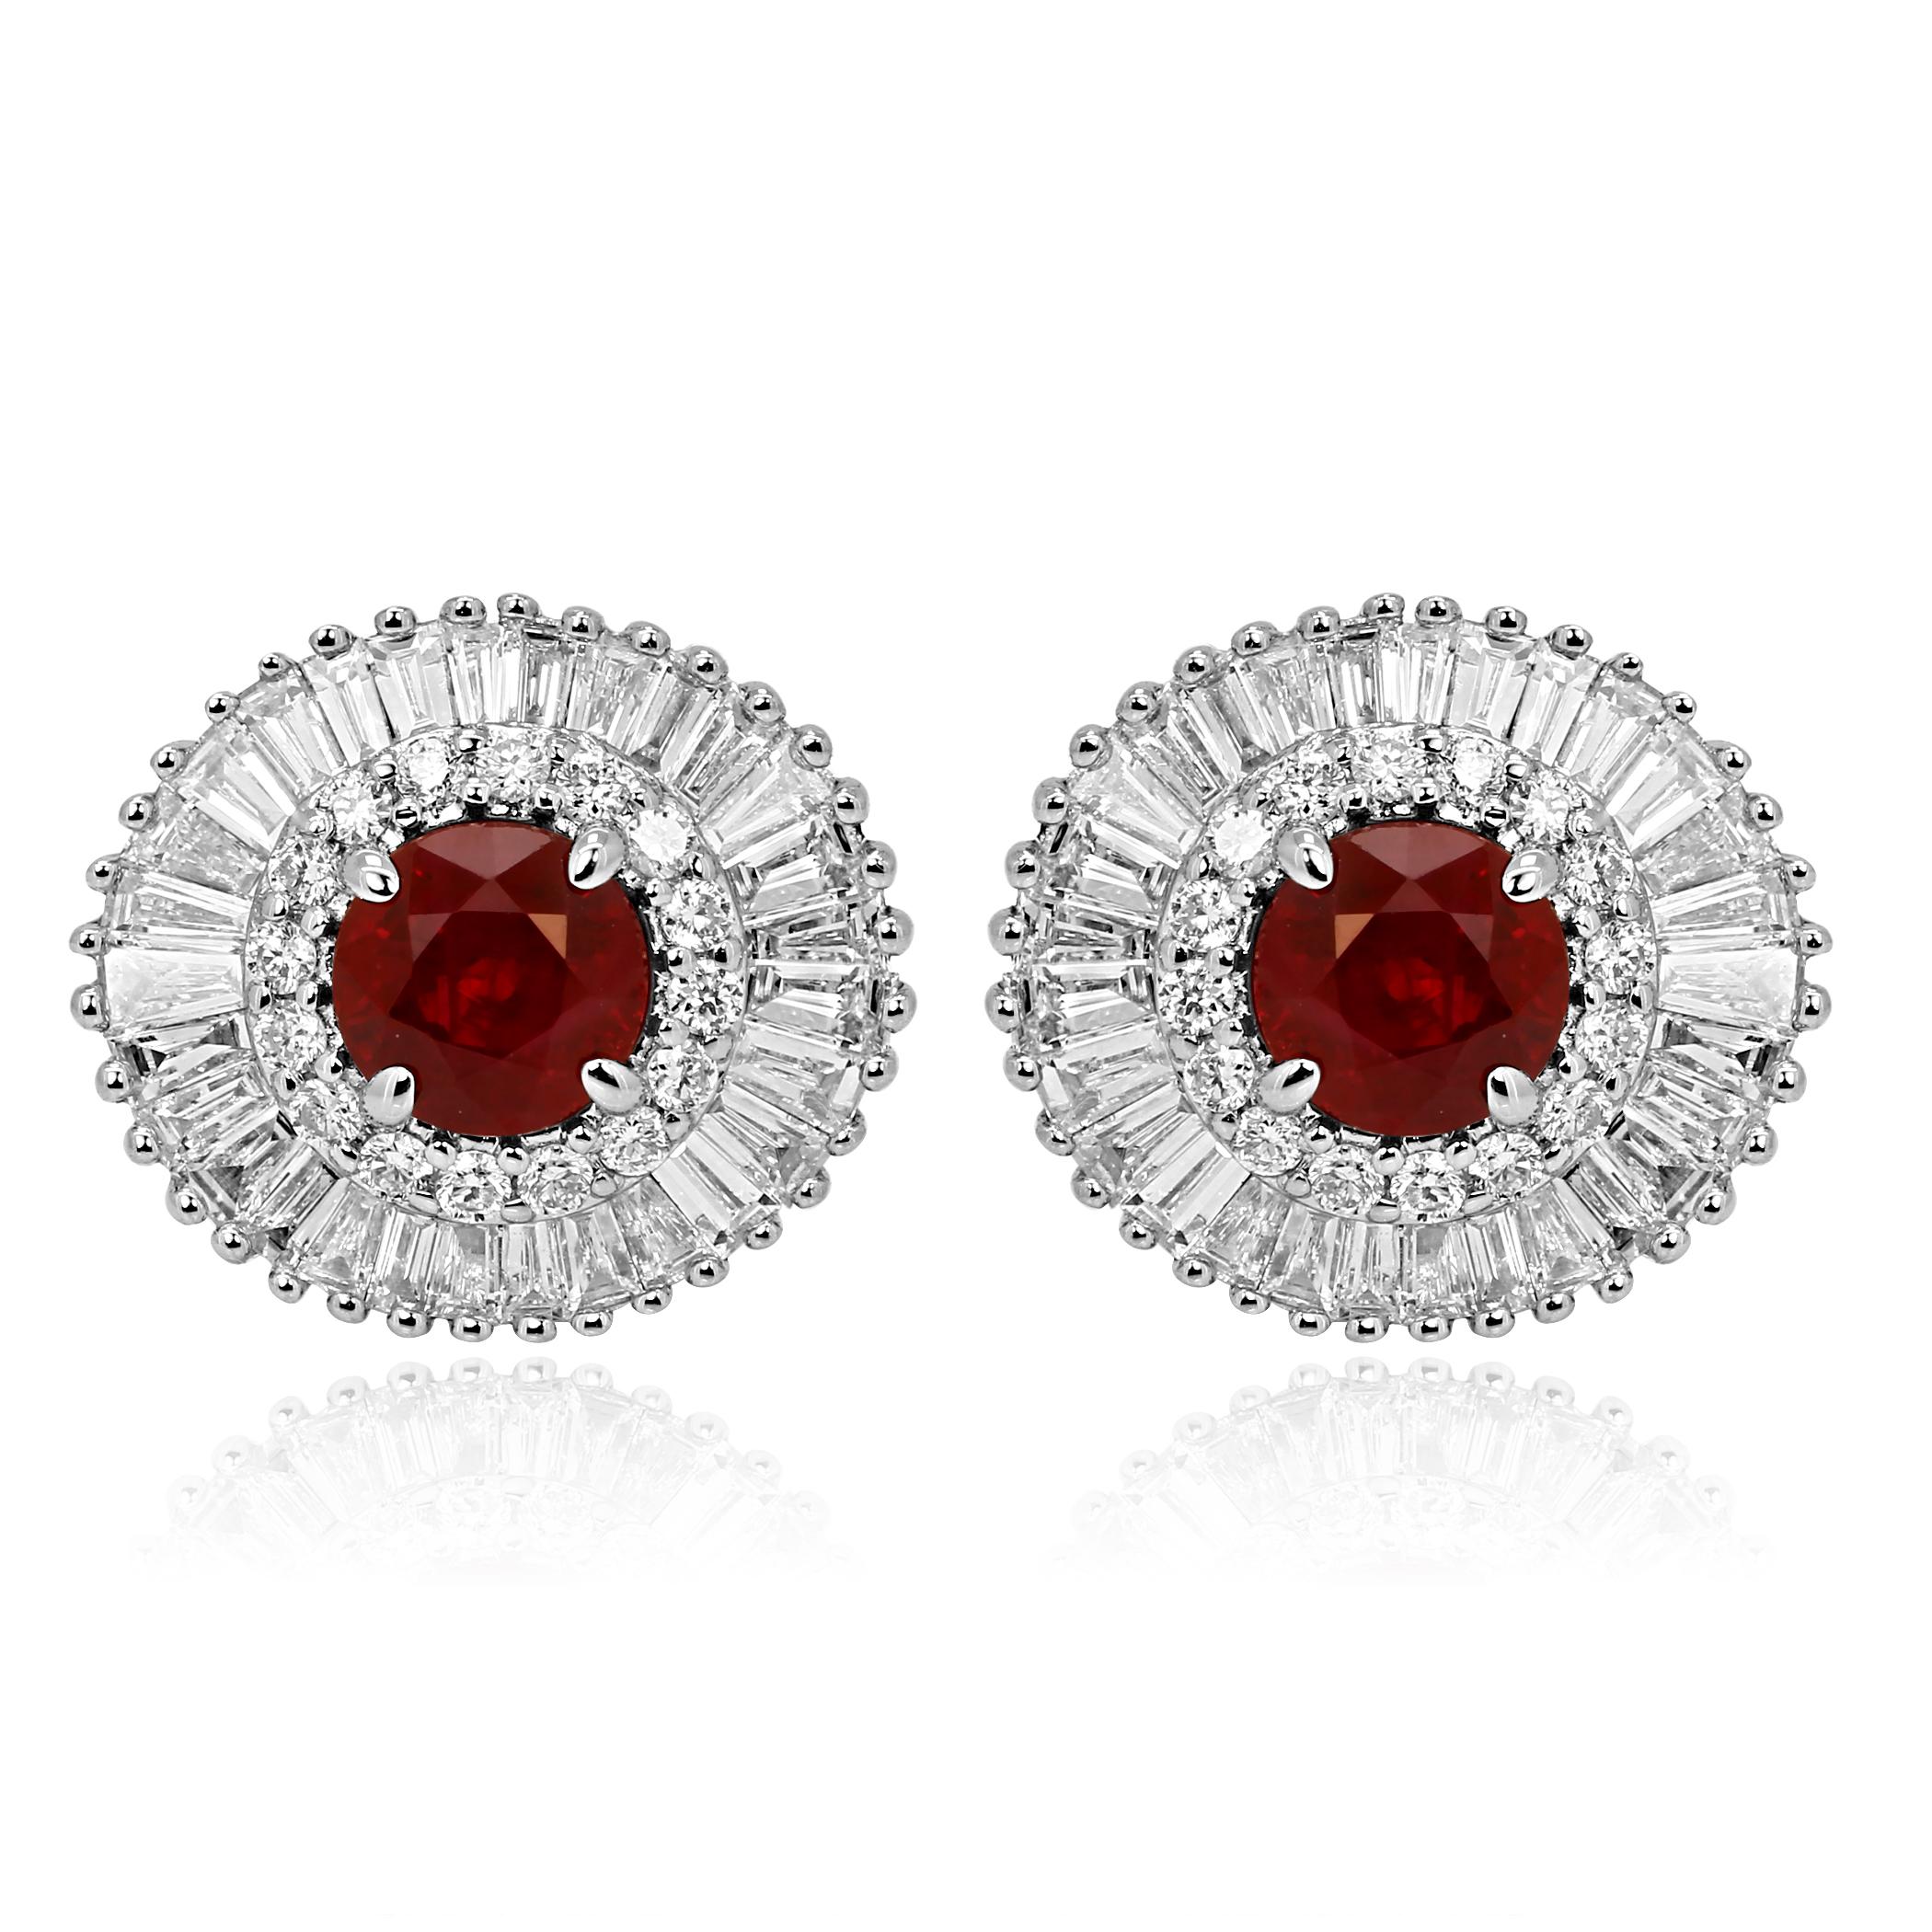 Gorgeous Ruby Round 1.37 Carat encircled in a Double Halo of White G-H Color VS-SI Round Diamonds 0.22 Carat and White G-H Color VS-SI Baguette Diamond 0.98 Carat in 14K White Gold Stunning Ballerina Style Earring.

Center Ruby Weight 1.37